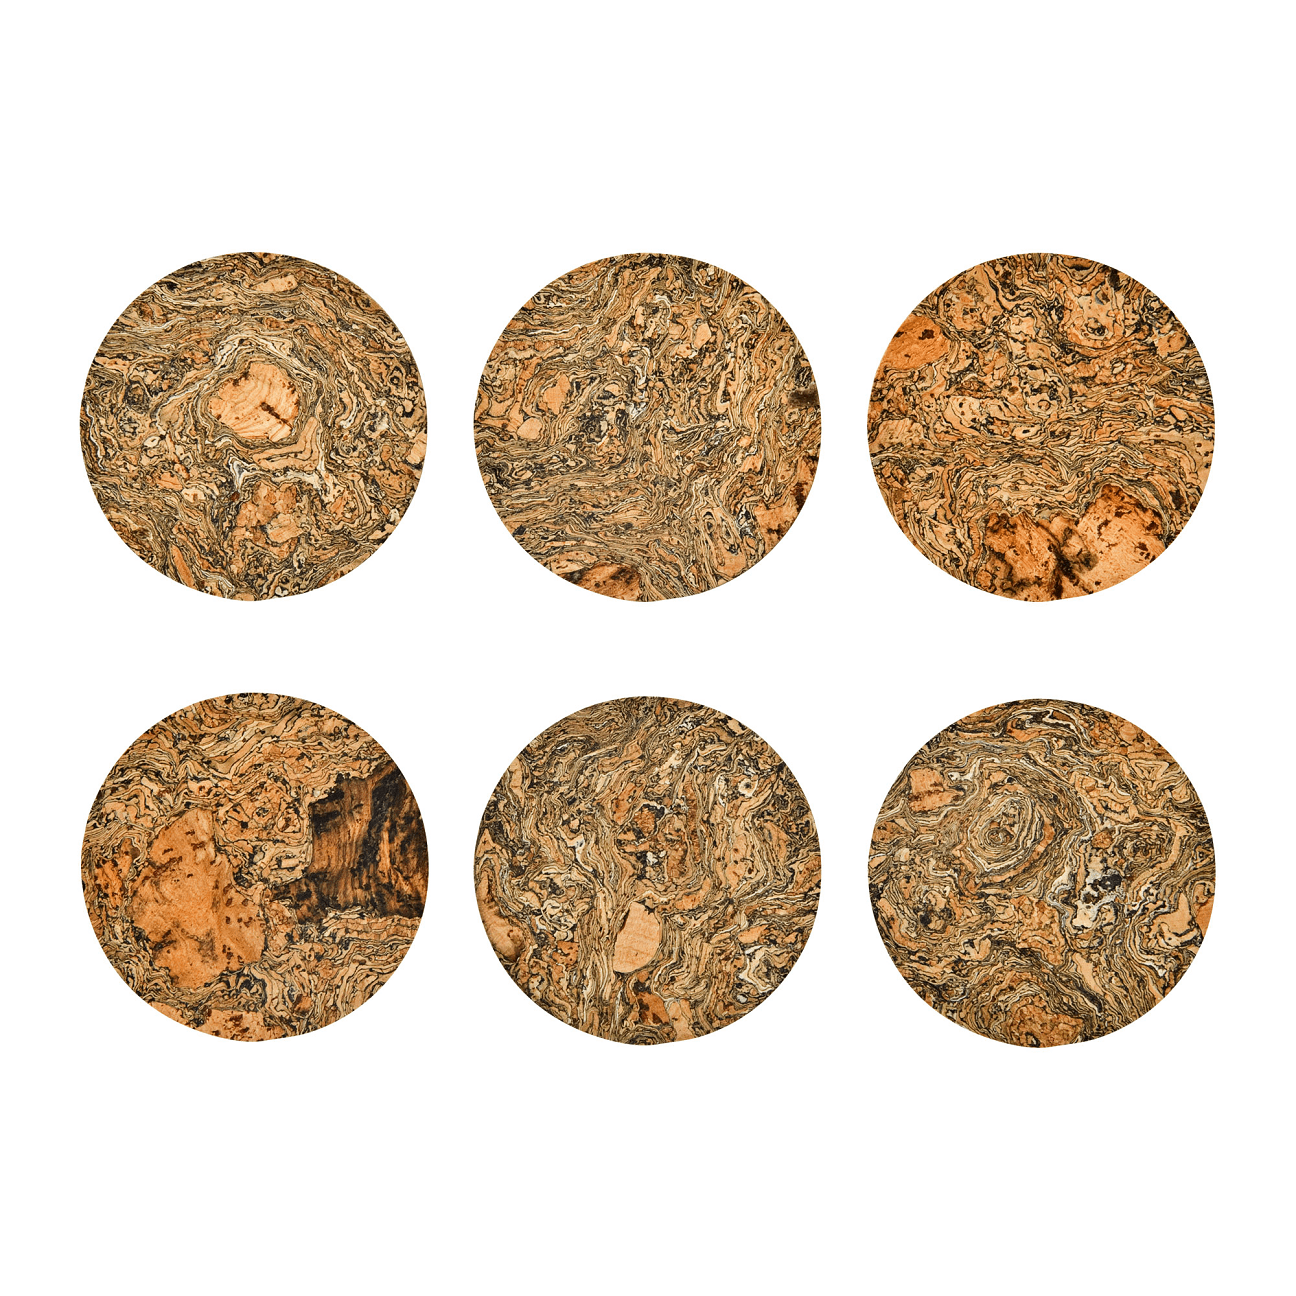 Hygloss Cork Coasters - 6 in. Round (Pack of 24)